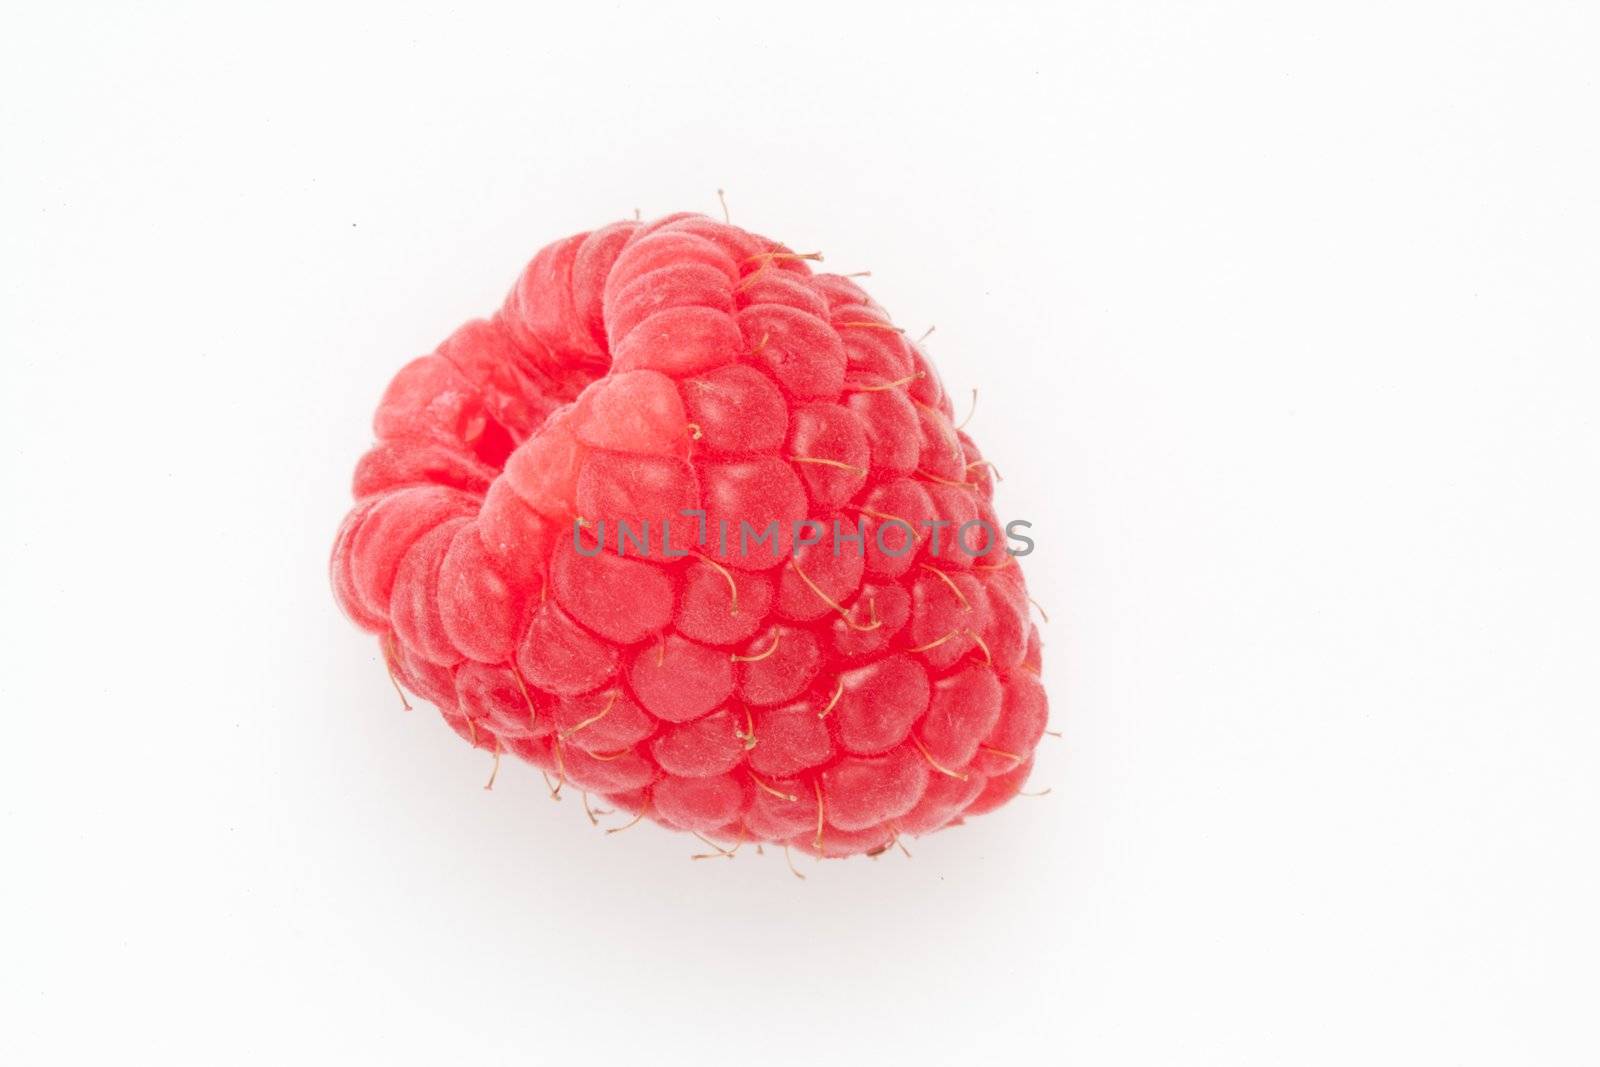 Raspberry against a white background